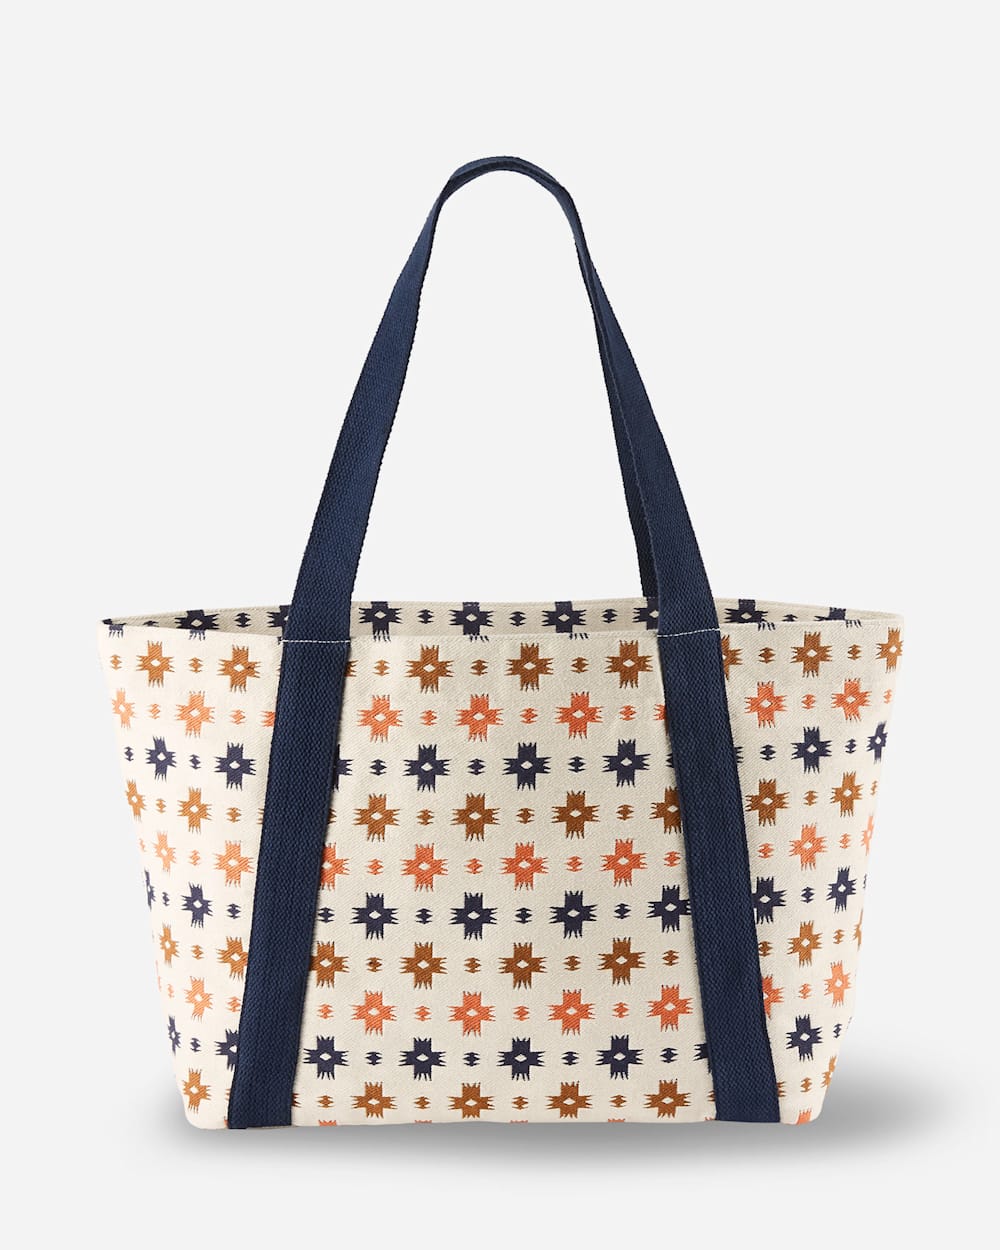 ALTERNATE VIEW OF SWEET WATER  COTTON TOTE IN MULTI image number 2